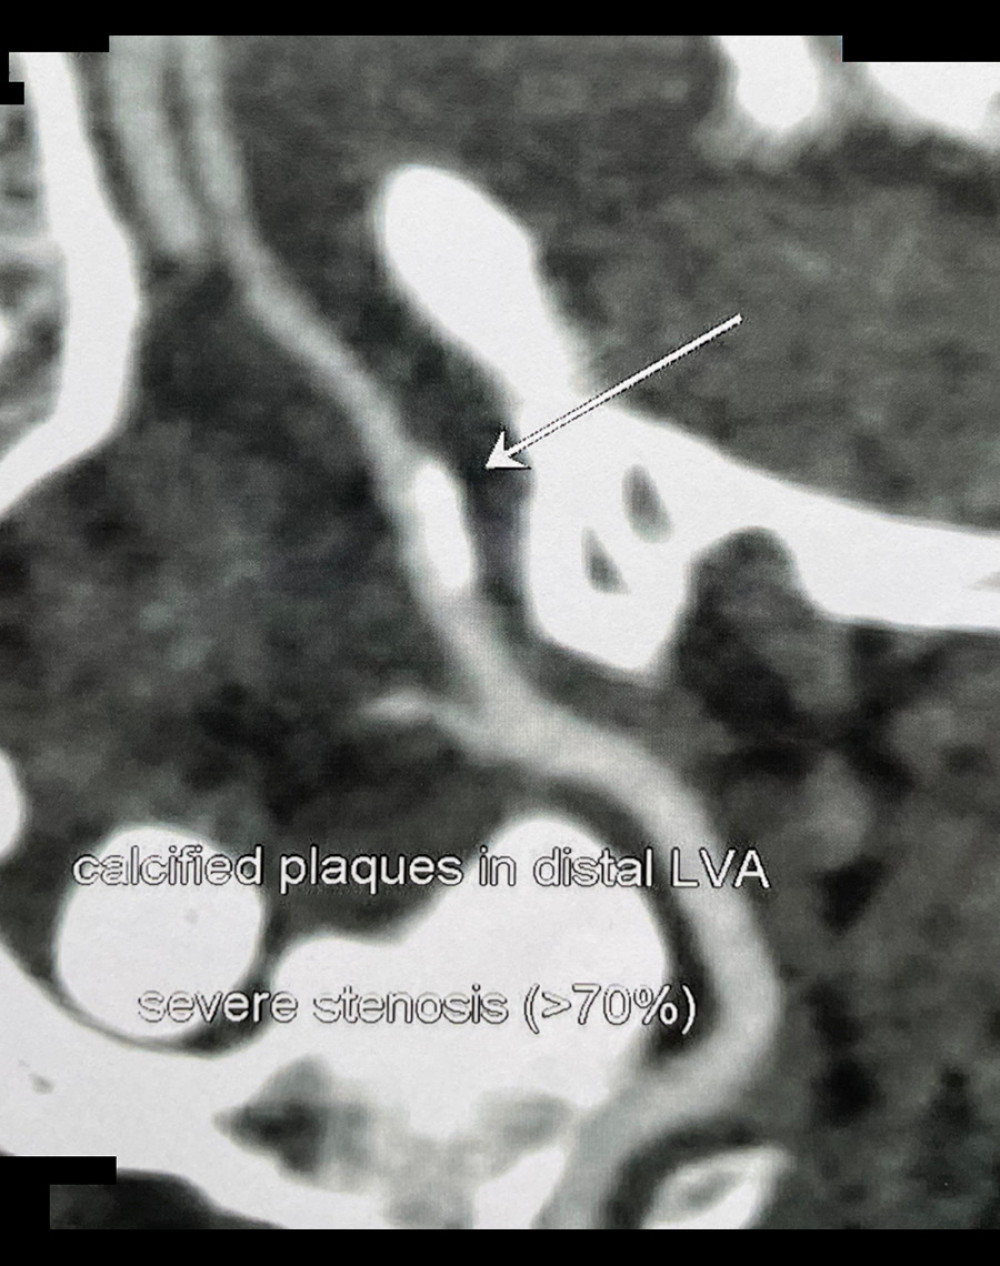 Oblique computed tomography angiogram of the head showing calcified plaque of the left vertebral artery (LVA) at the transition between the V3 and V4 segment of the right vertebral artery RVA (arrow).